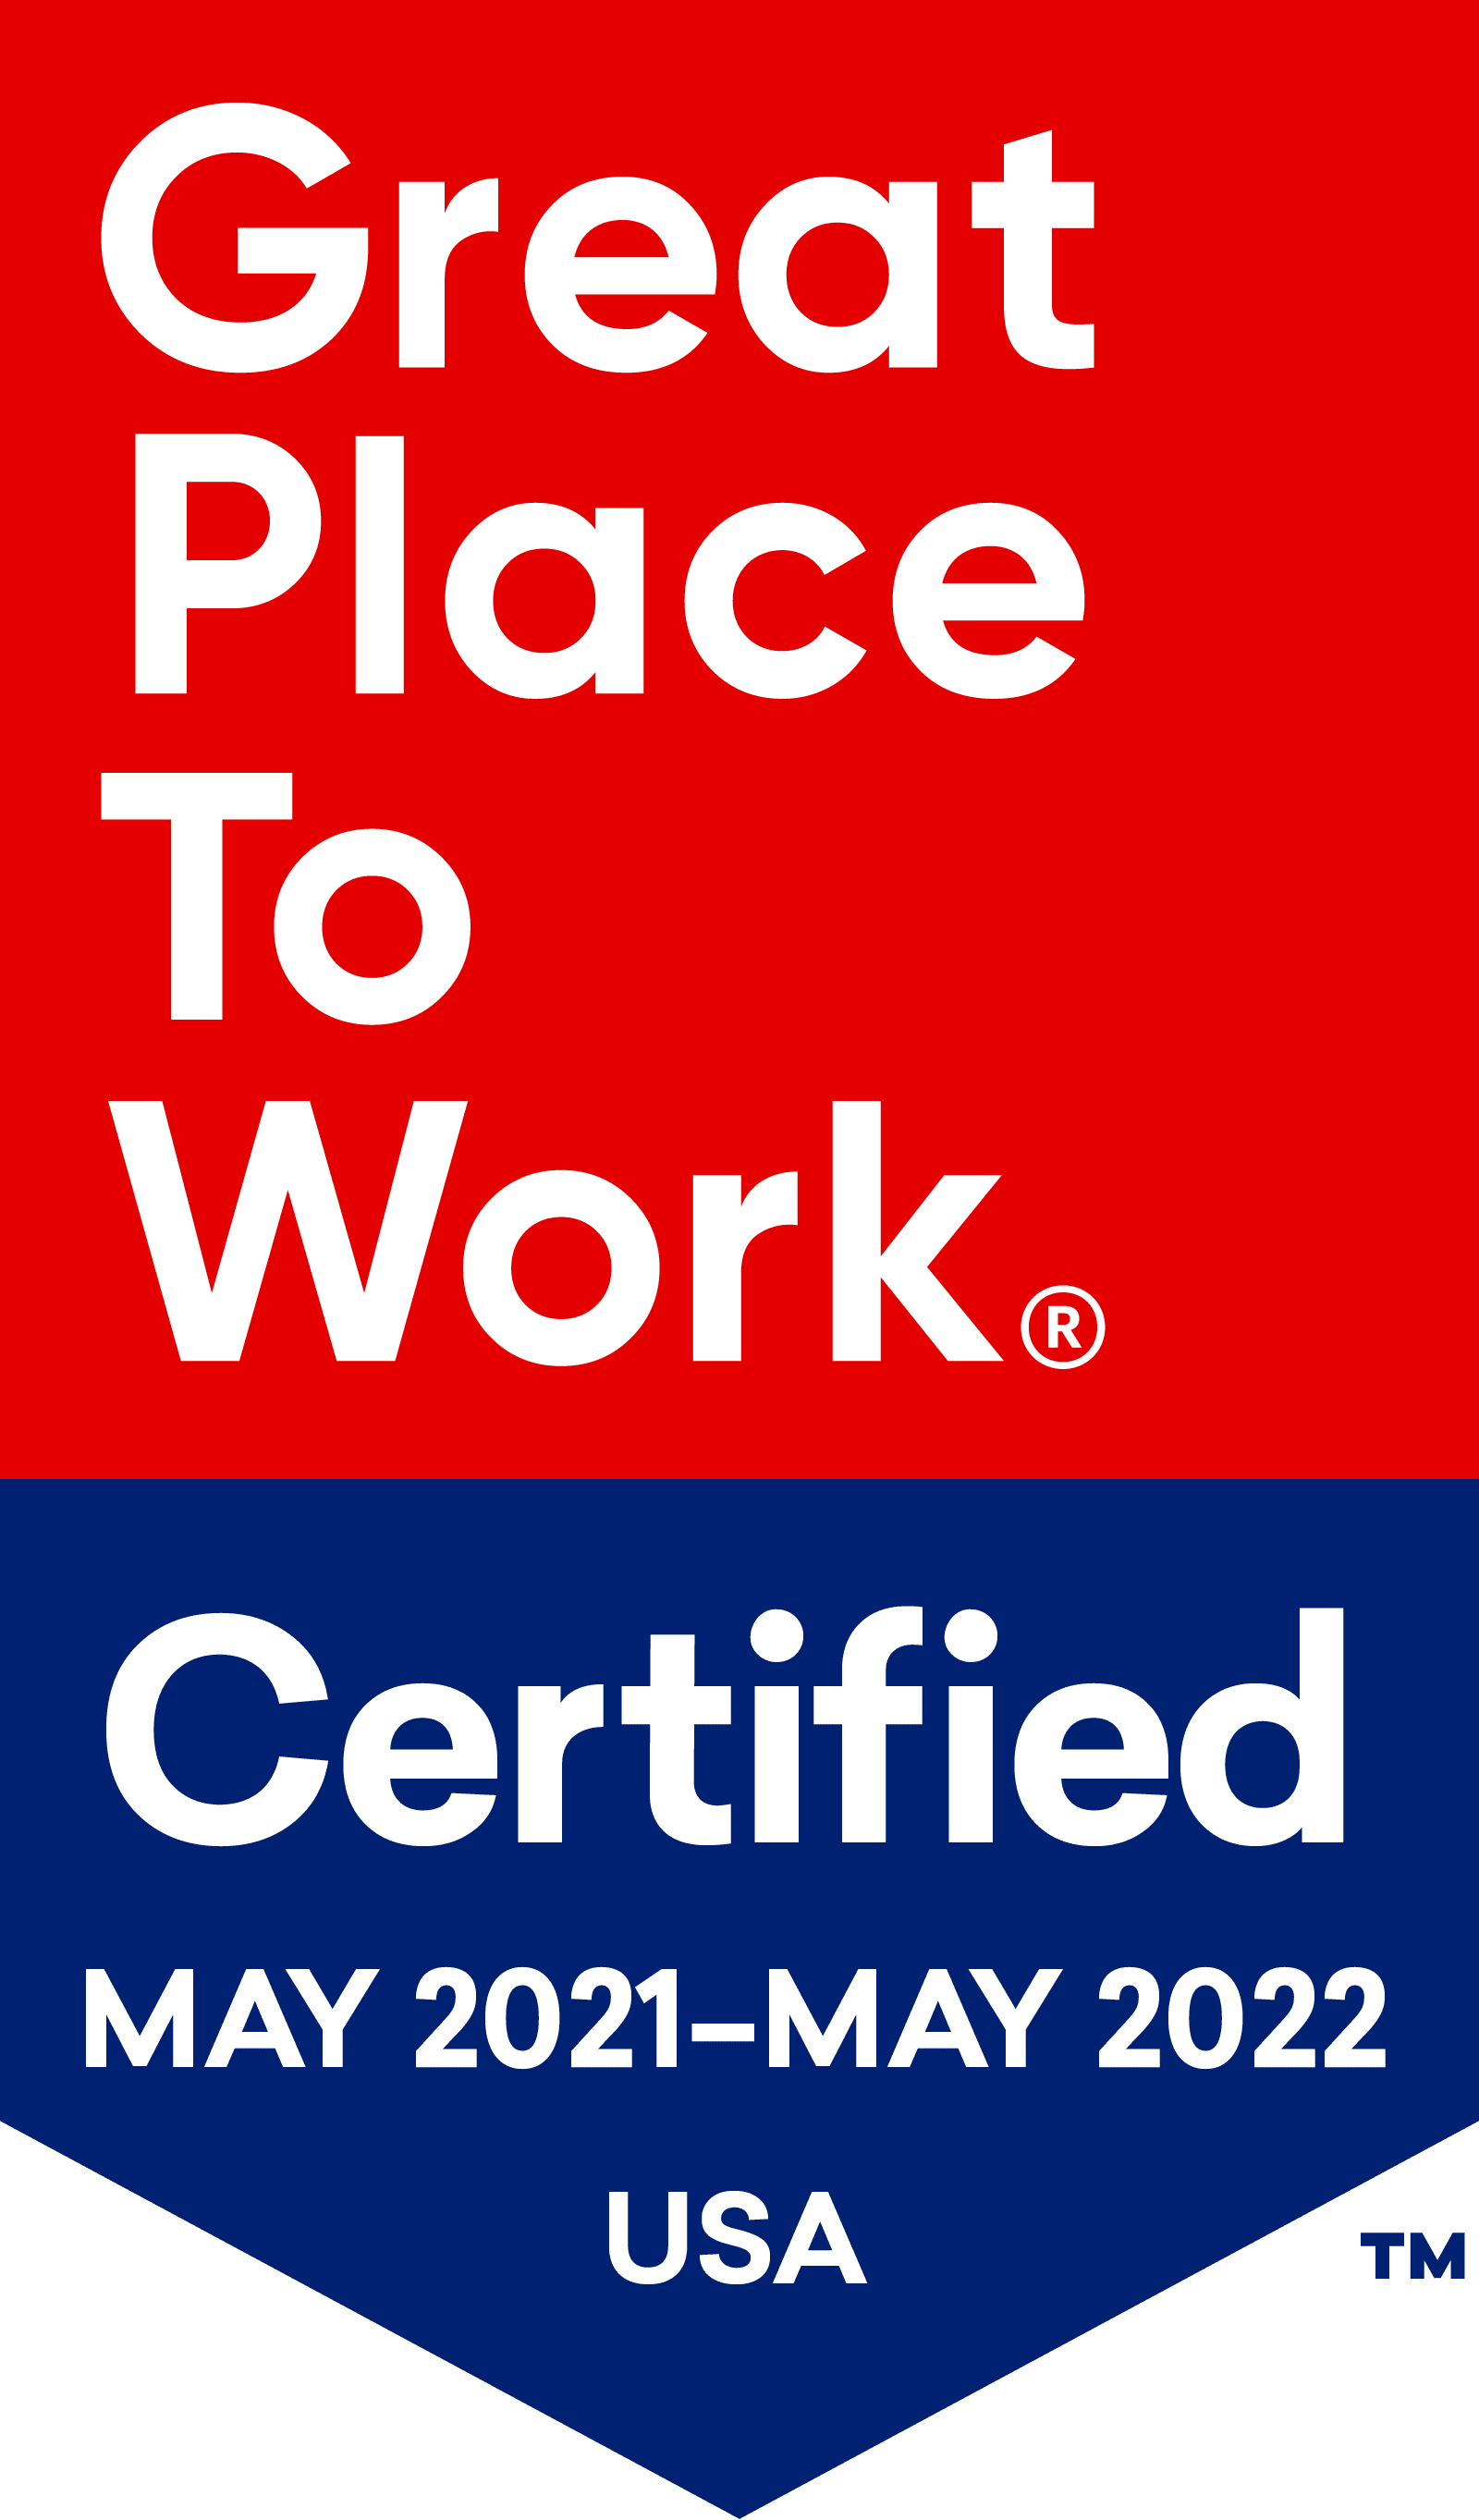 Almond Heights is Great Place To Work Certified